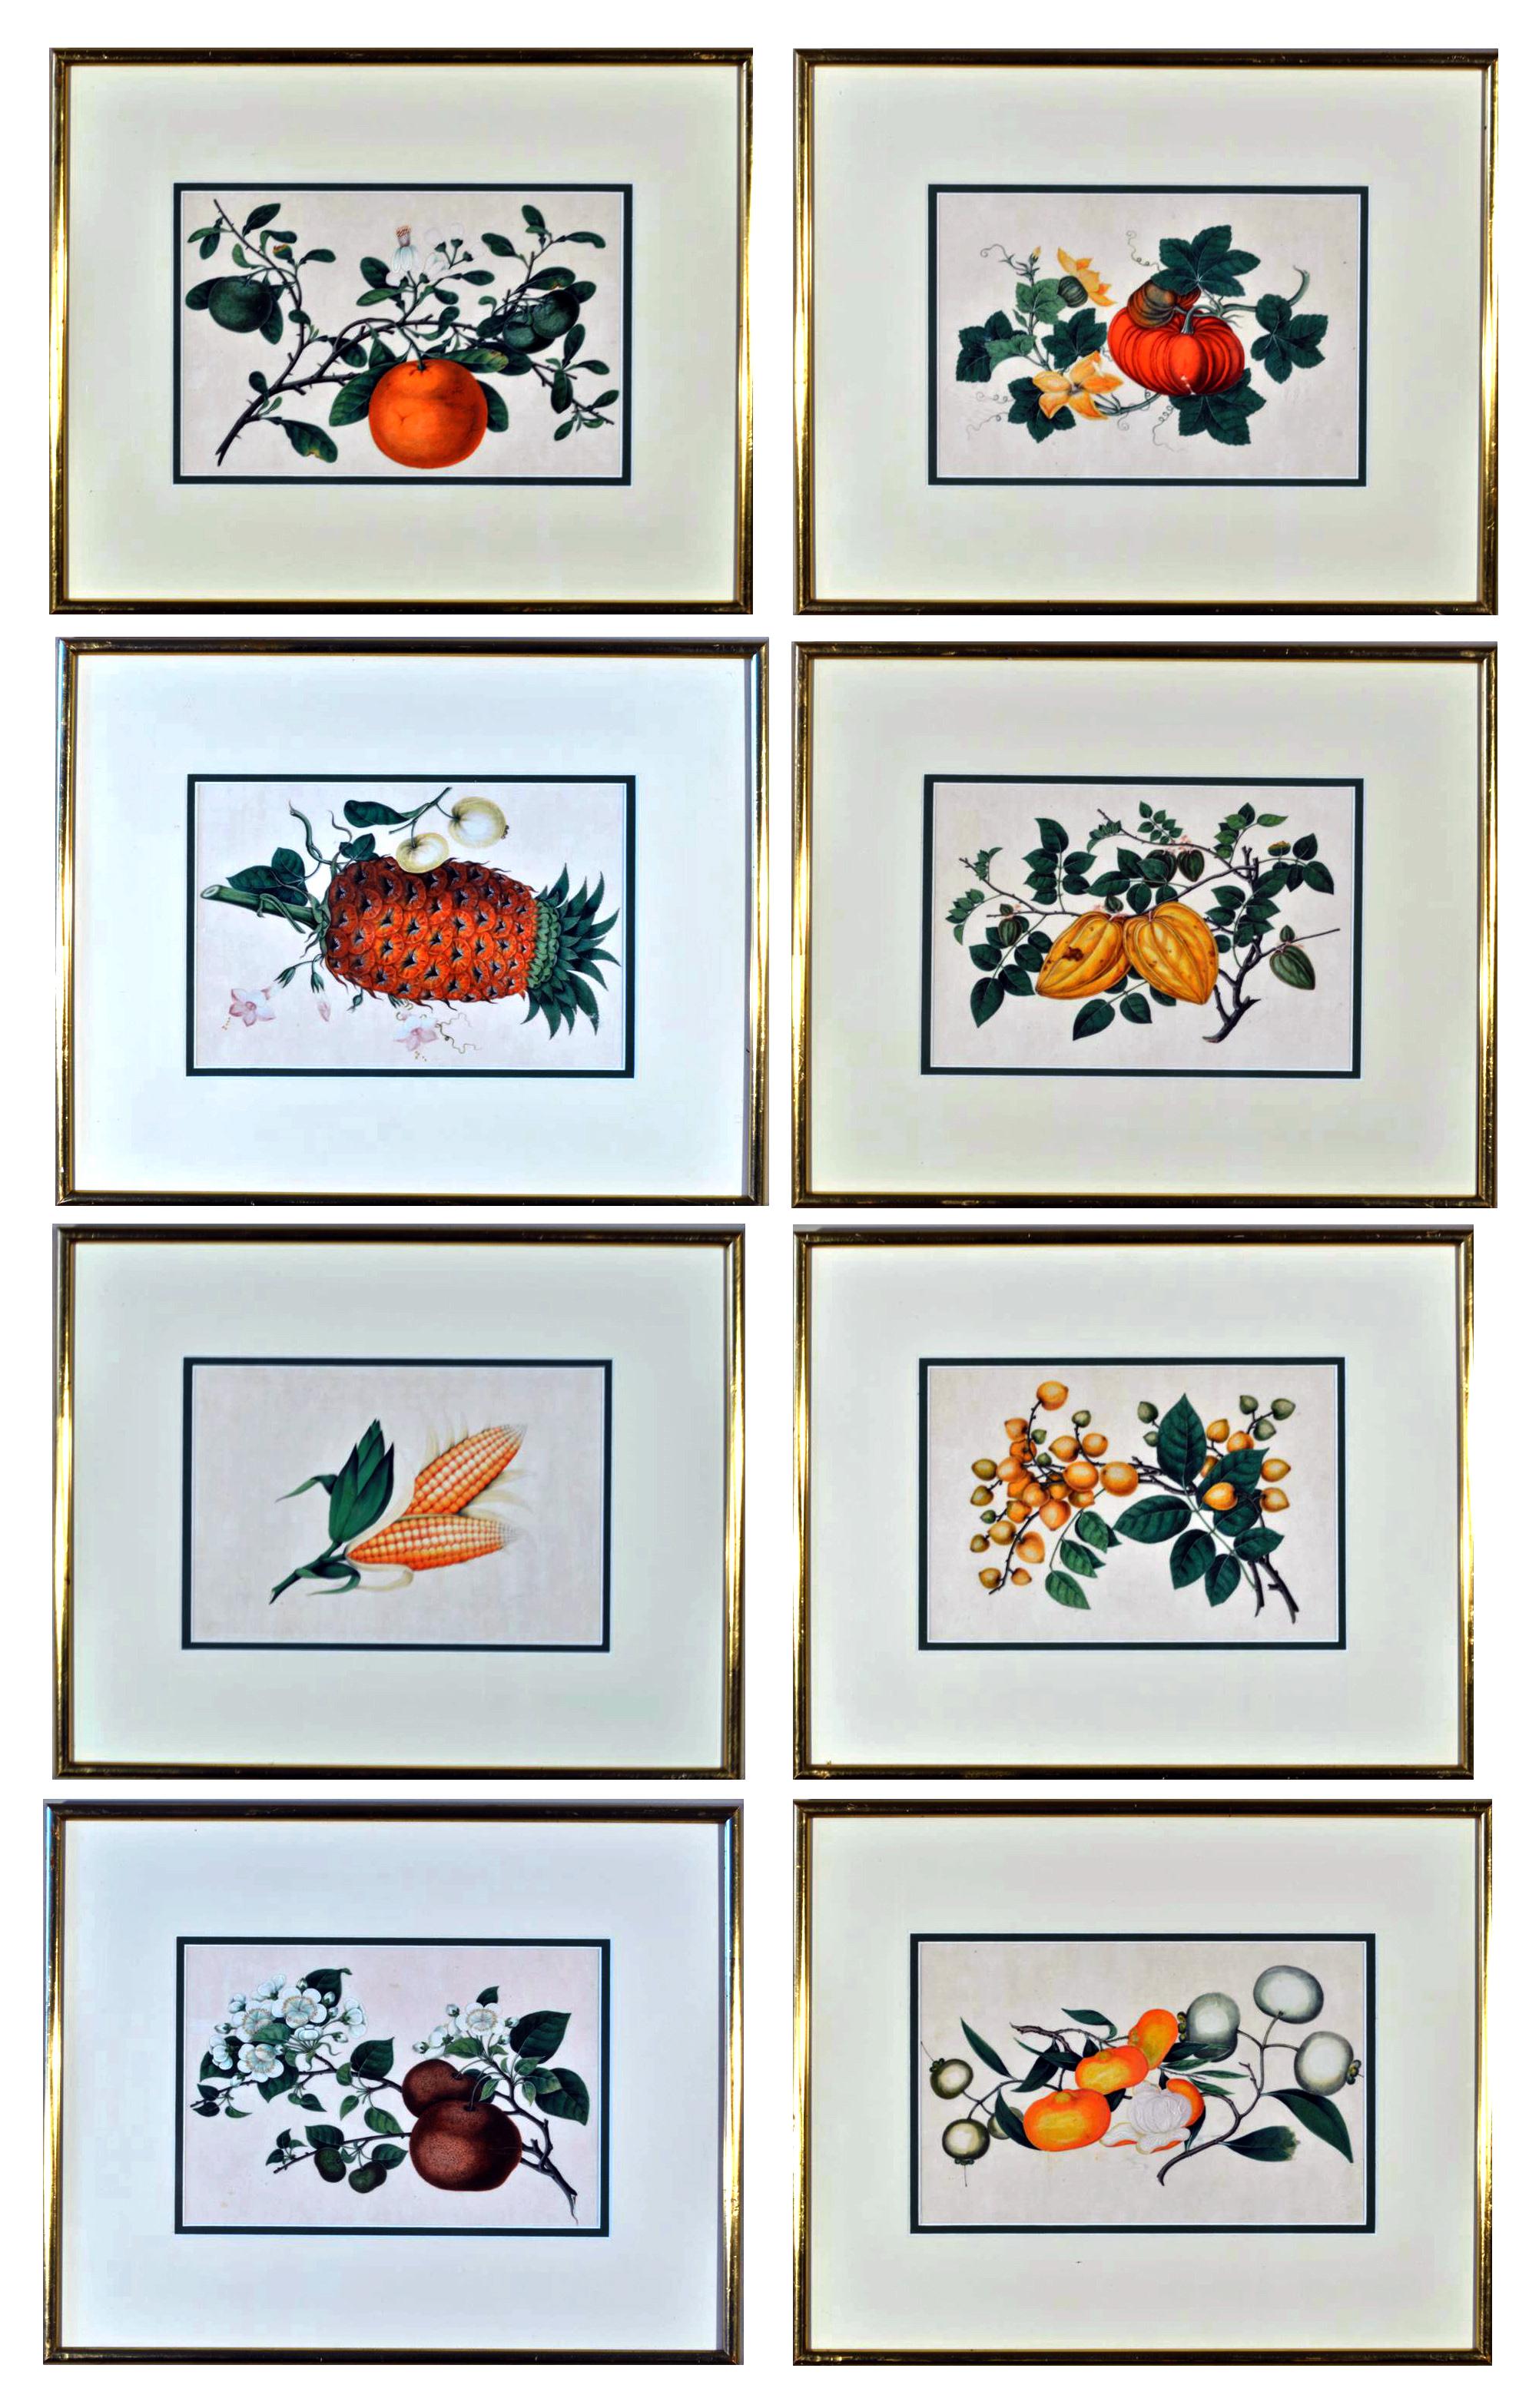 Chinese China trade watercolors of exotic fruit on pith paper,
Gilt frames,
Mid-19th century

The eight Chinese watercolors on pith paper are of fine quality and depict various exotic fruits including pineapples, lychees, finger citrus and